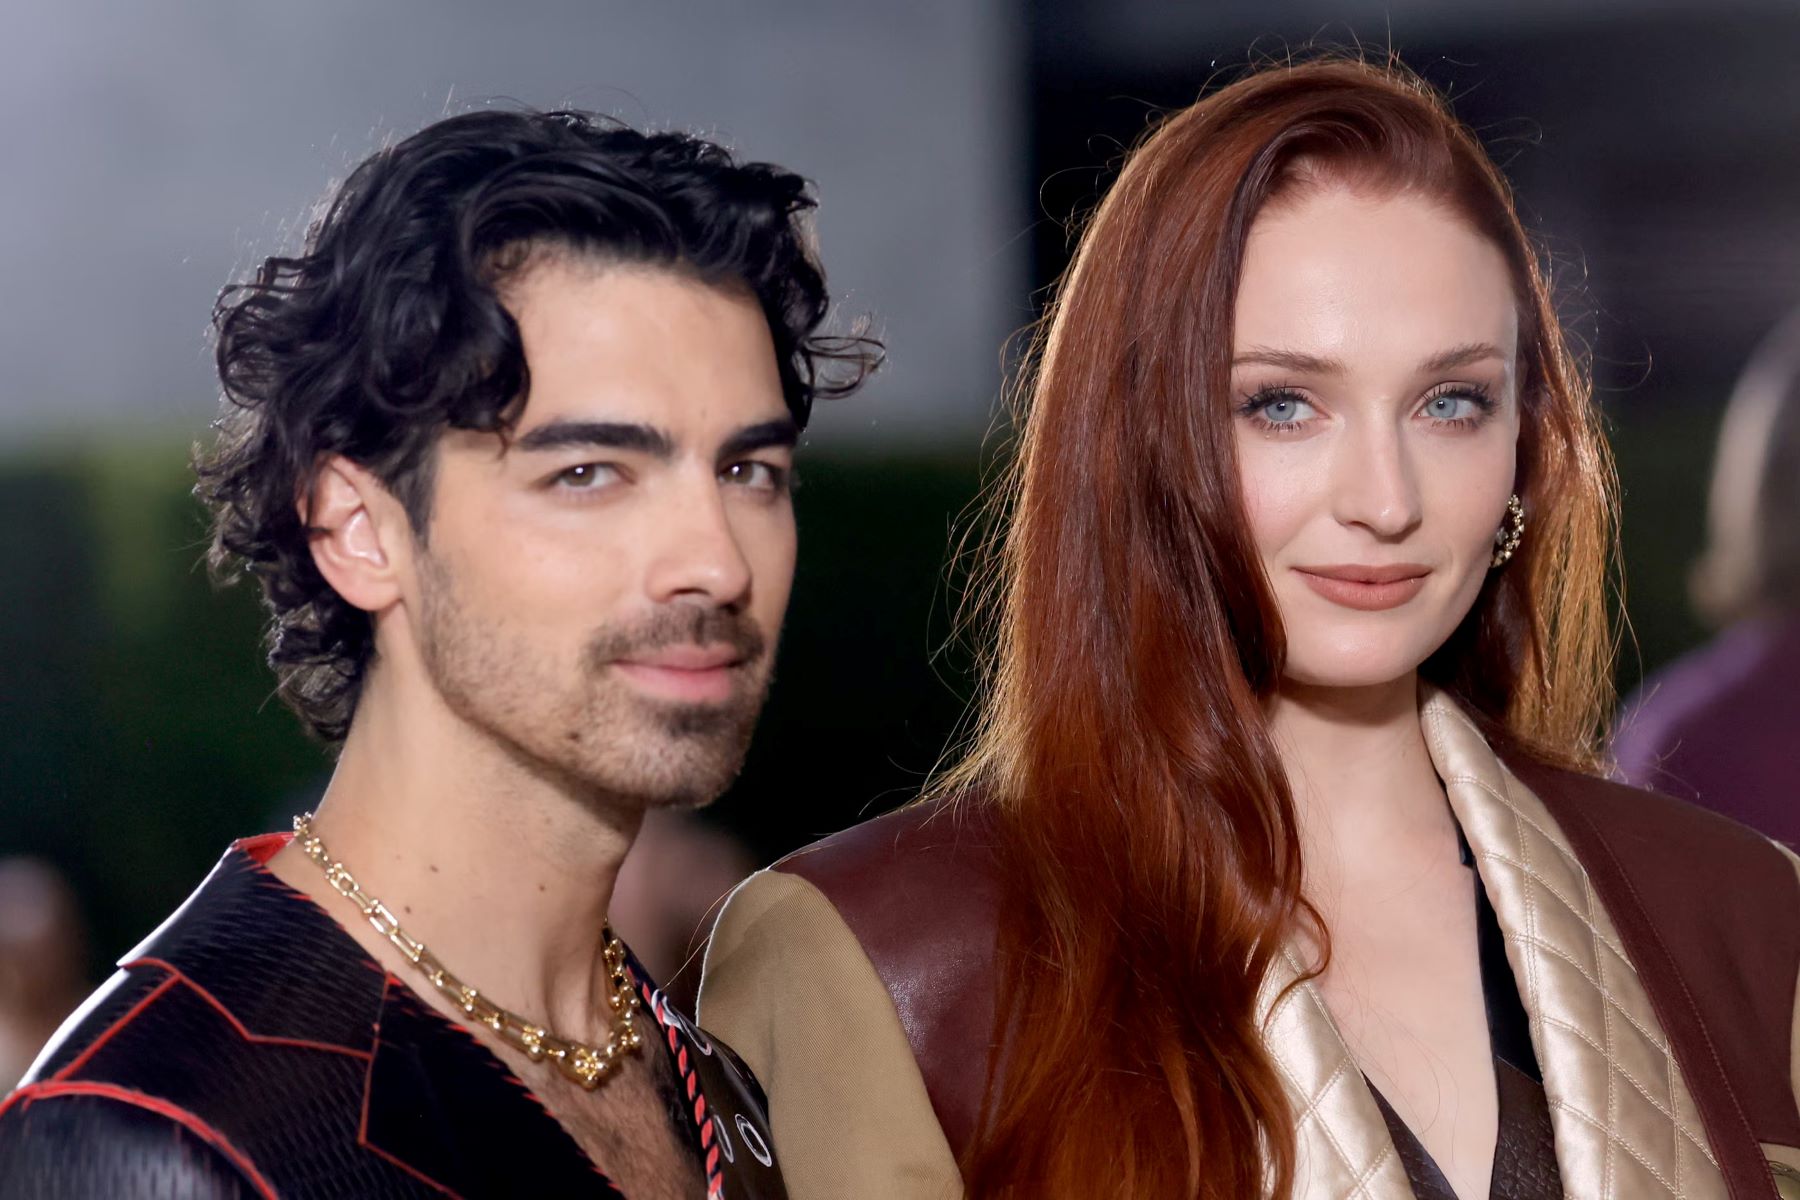 Joe Jonas And Sophie Turner’s Relationship Struggles Surface After Second Child’s Birth